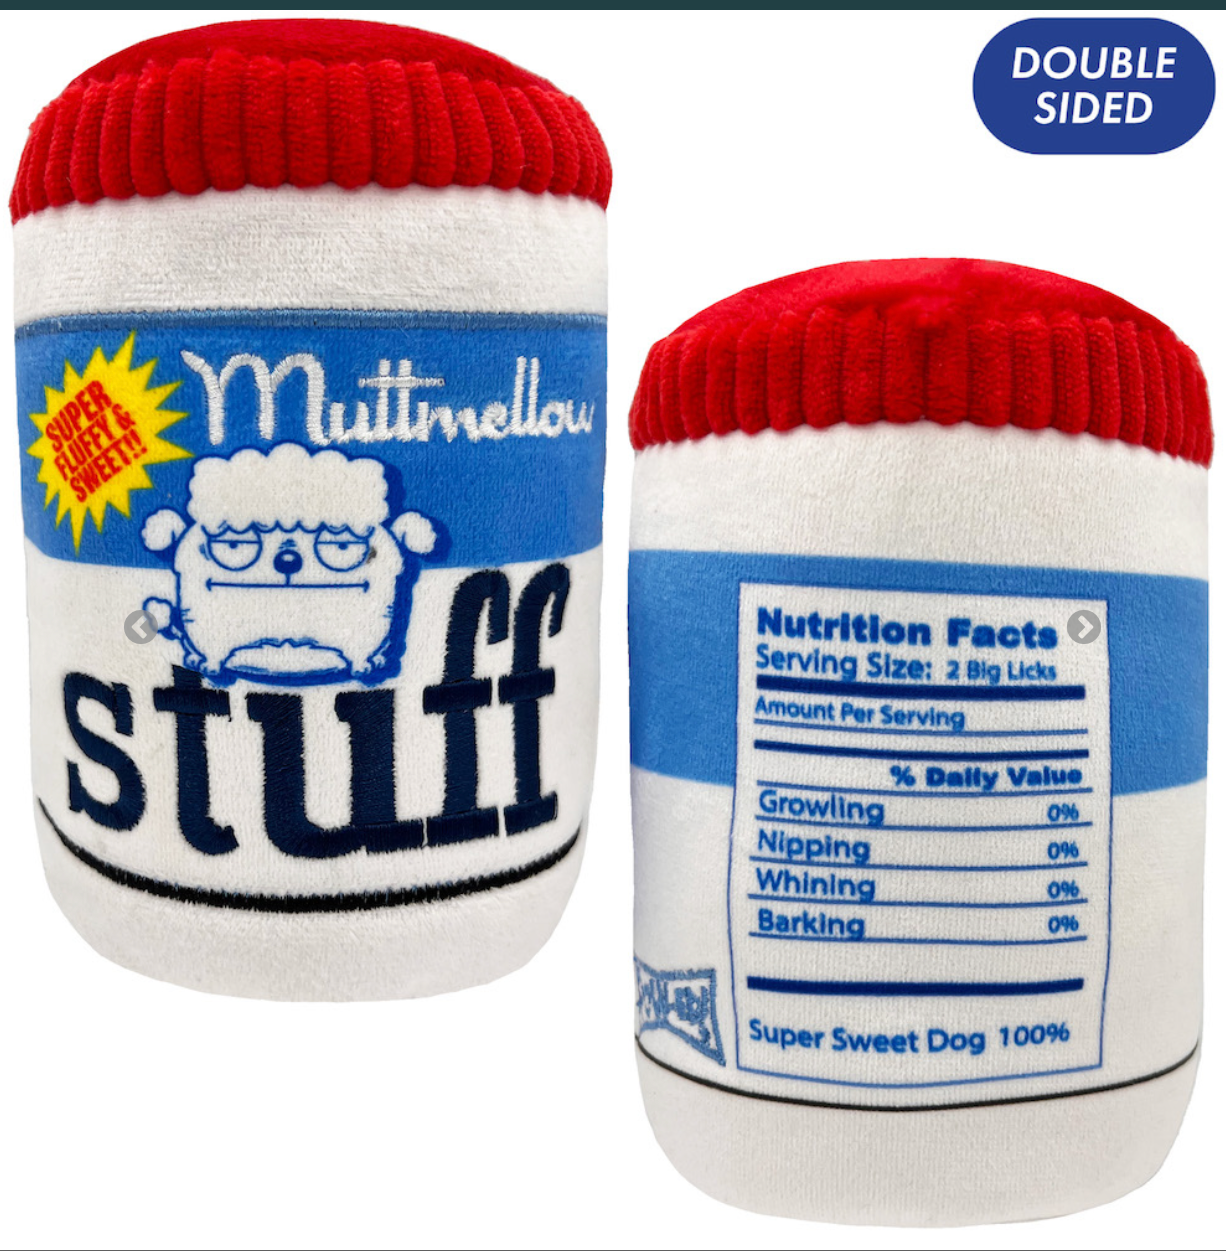 Muttmellow Stuff Dog Toy (Double Sided)